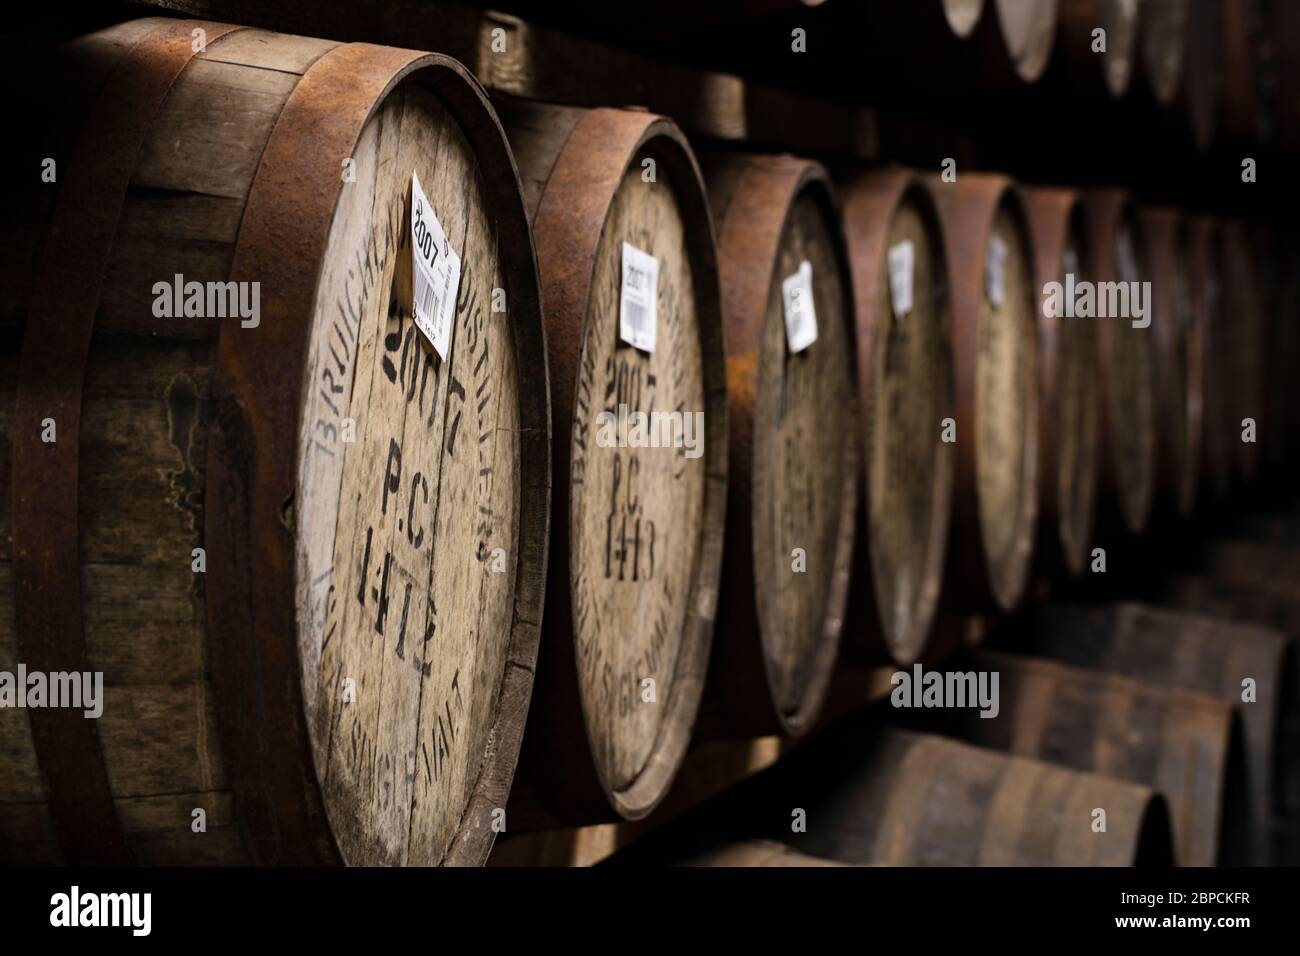 Barrels of whisky in bond on the island of Islay Stock Photo